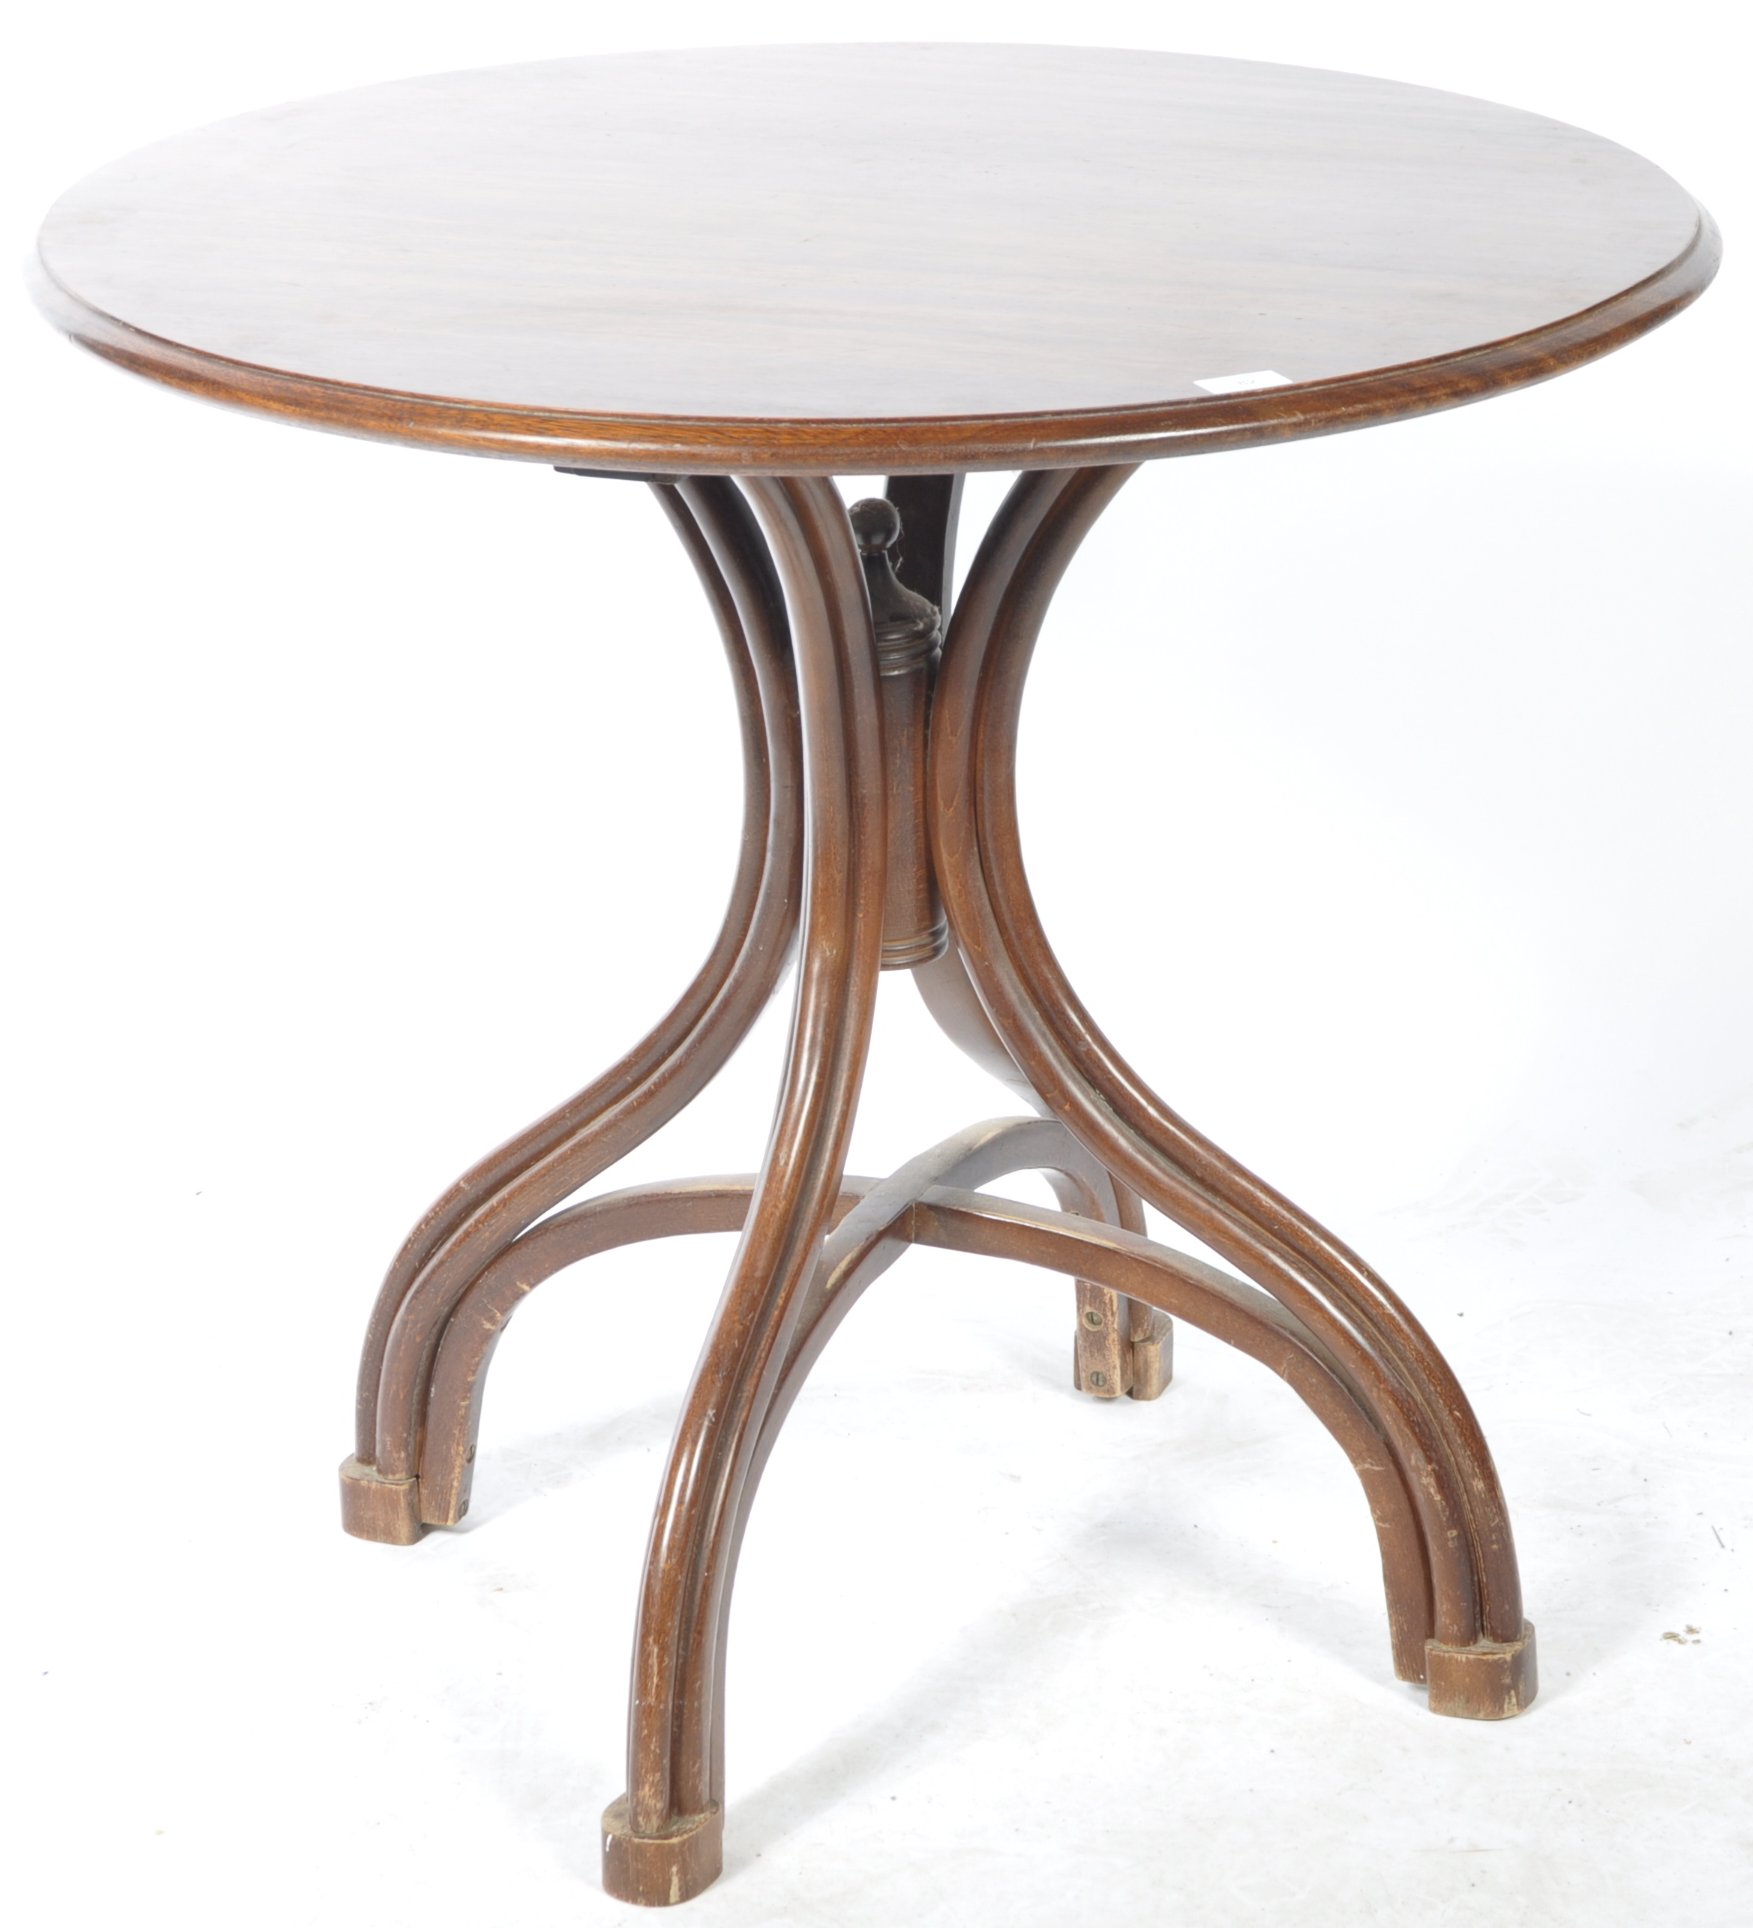 DINETTE MID CENTURY RETRO VINTAGE CAFE / BAR TABLE - Image 2 of 7